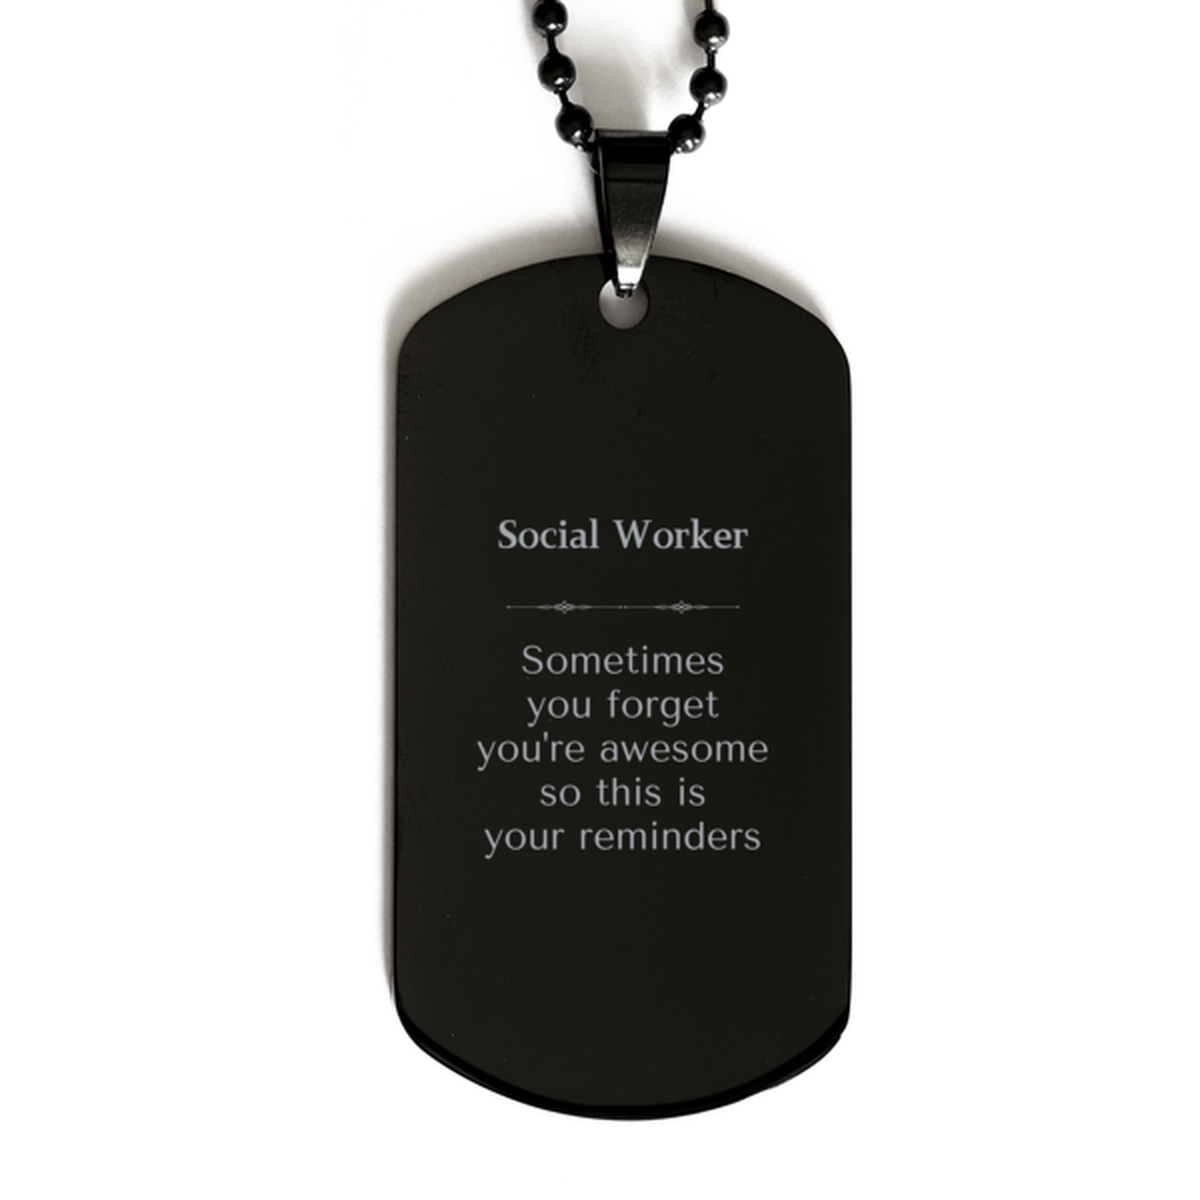 Sentimental Social Worker Black Dog Tag, Social Worker Sometimes you forget you're awesome so this is your reminders, Graduation Christmas Birthday Gifts for Social Worker, Men, Women, Coworkers